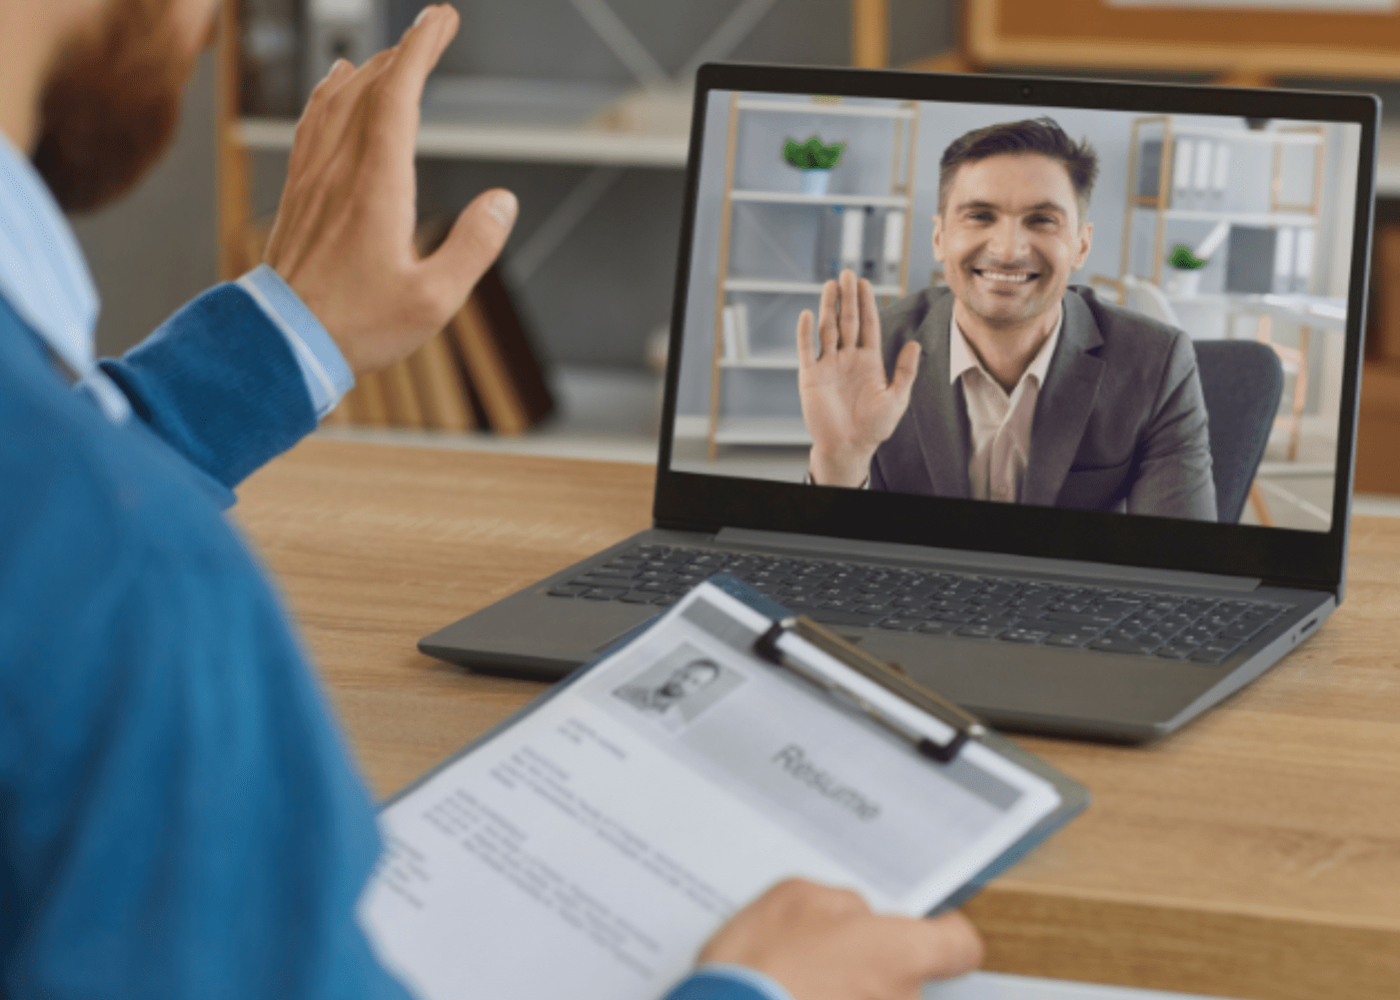 A virtual interview with two businessmen on a laptop